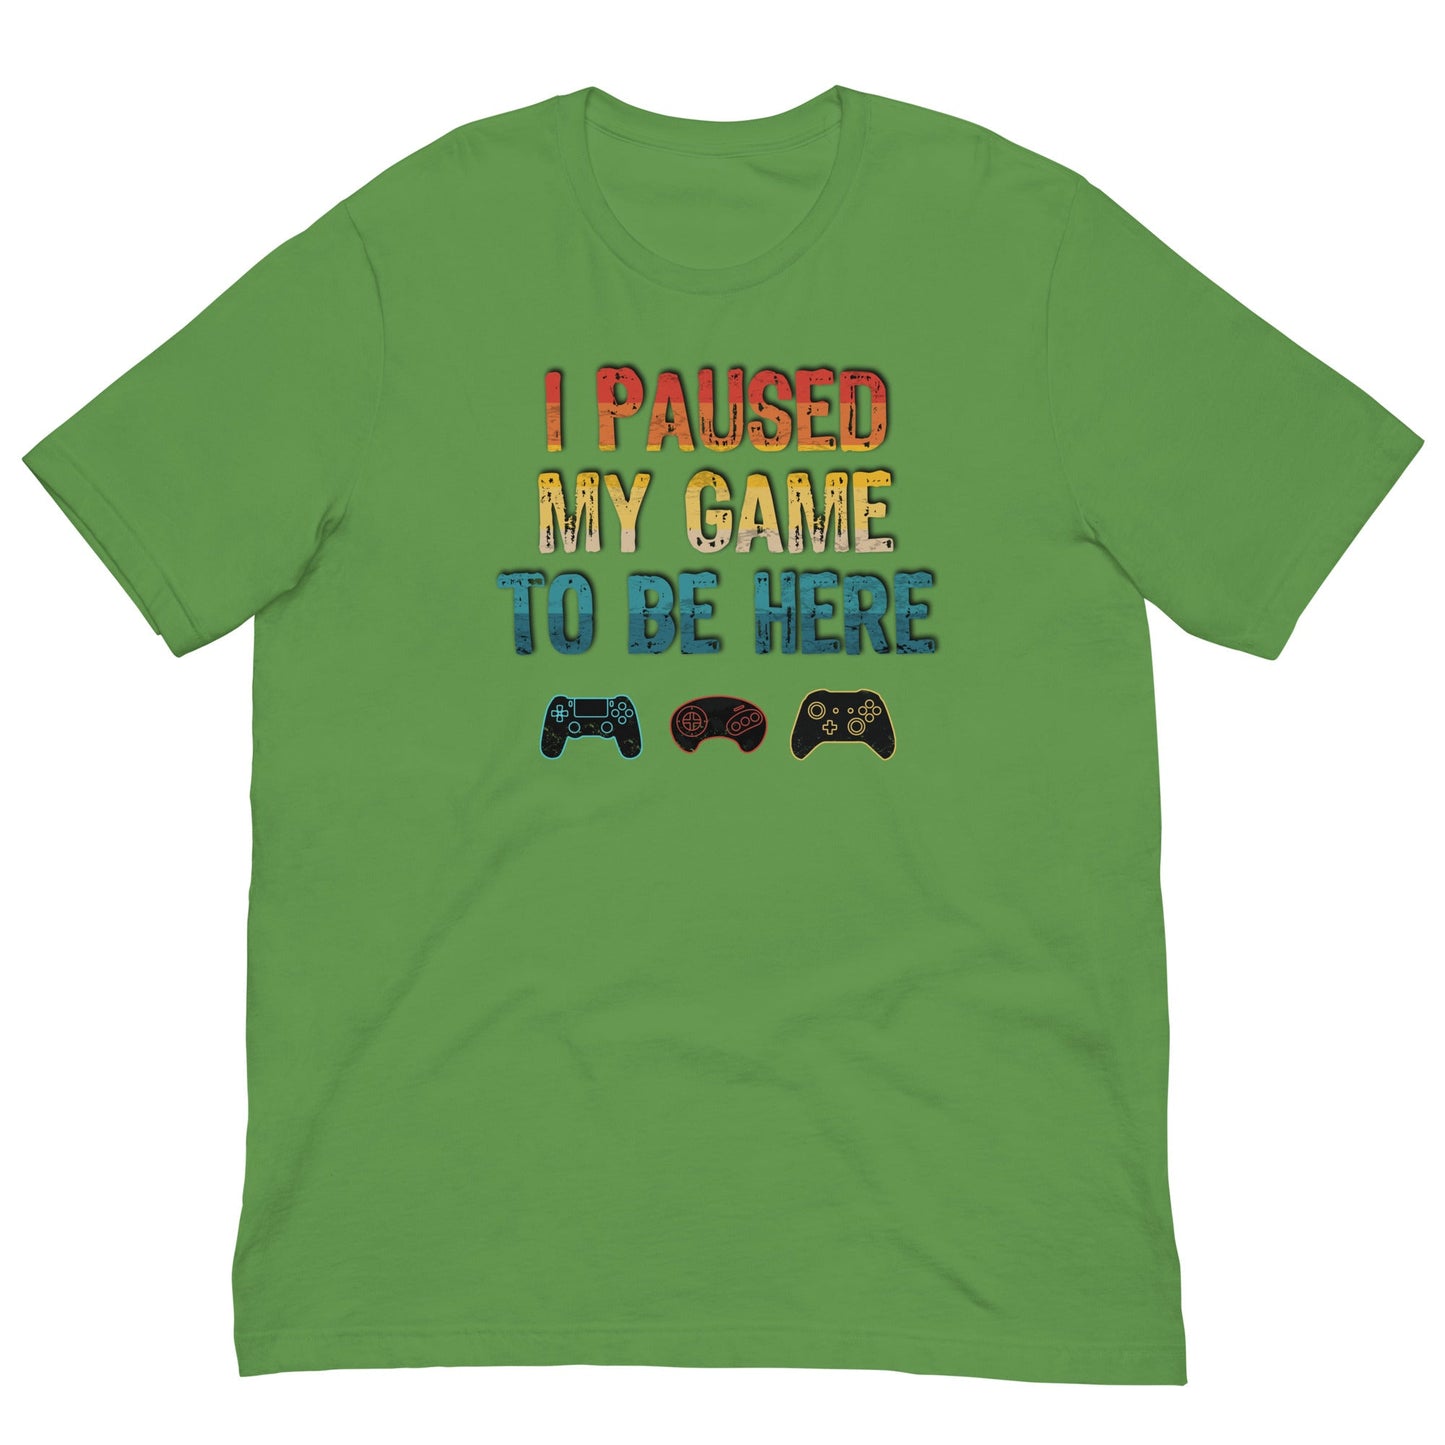 Scar Design Leaf / S I paused my game to be here T-shirt